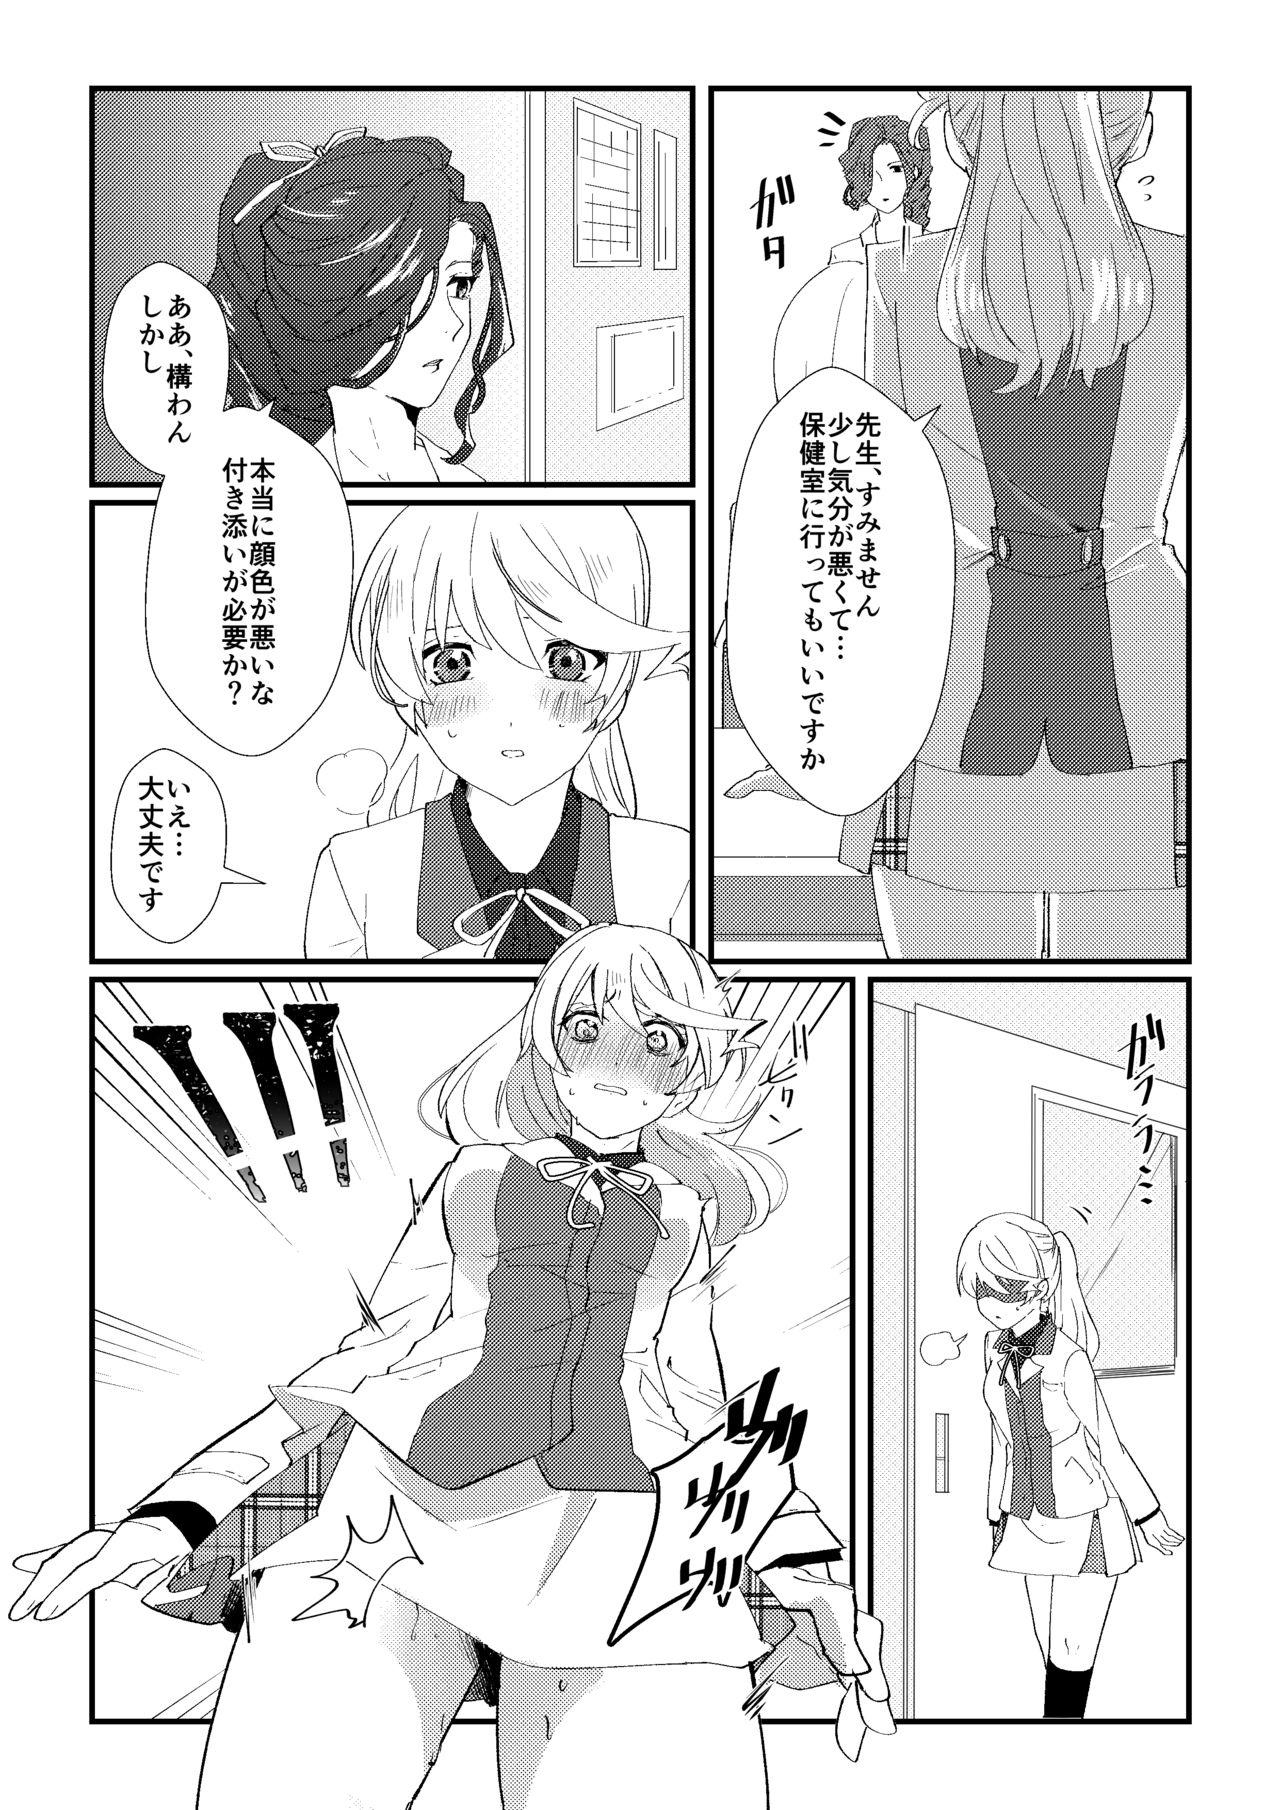 Extreme crazy about you - Tales of zestiria Shy - Page 3